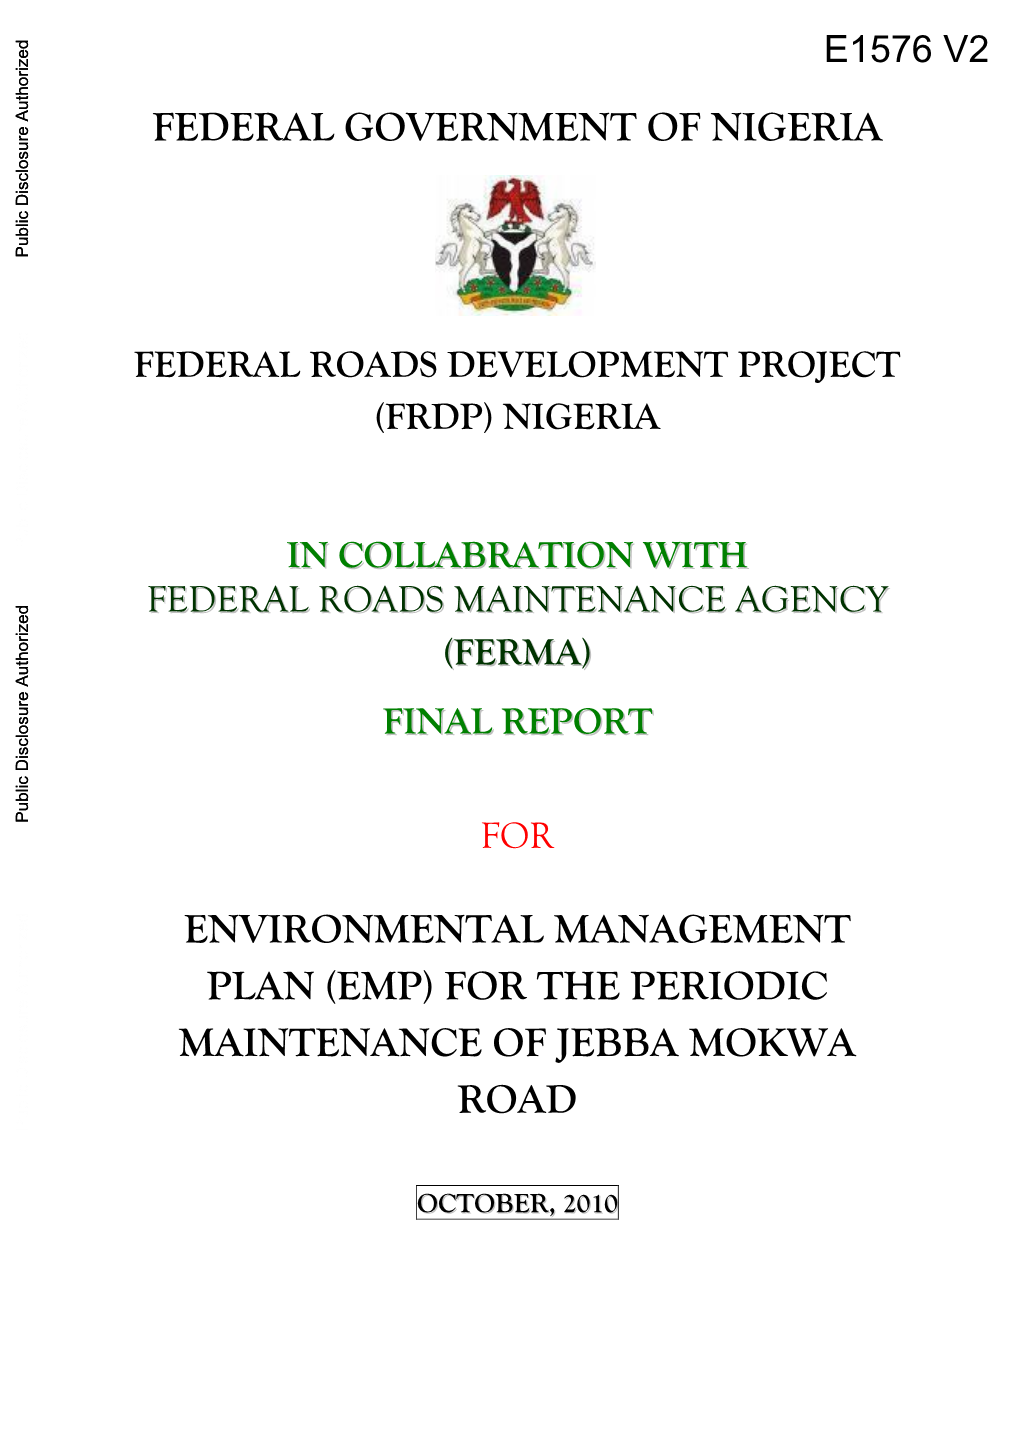 FEDERAL GOVERNMENT of NIGERIA Public Disclosure Authorized